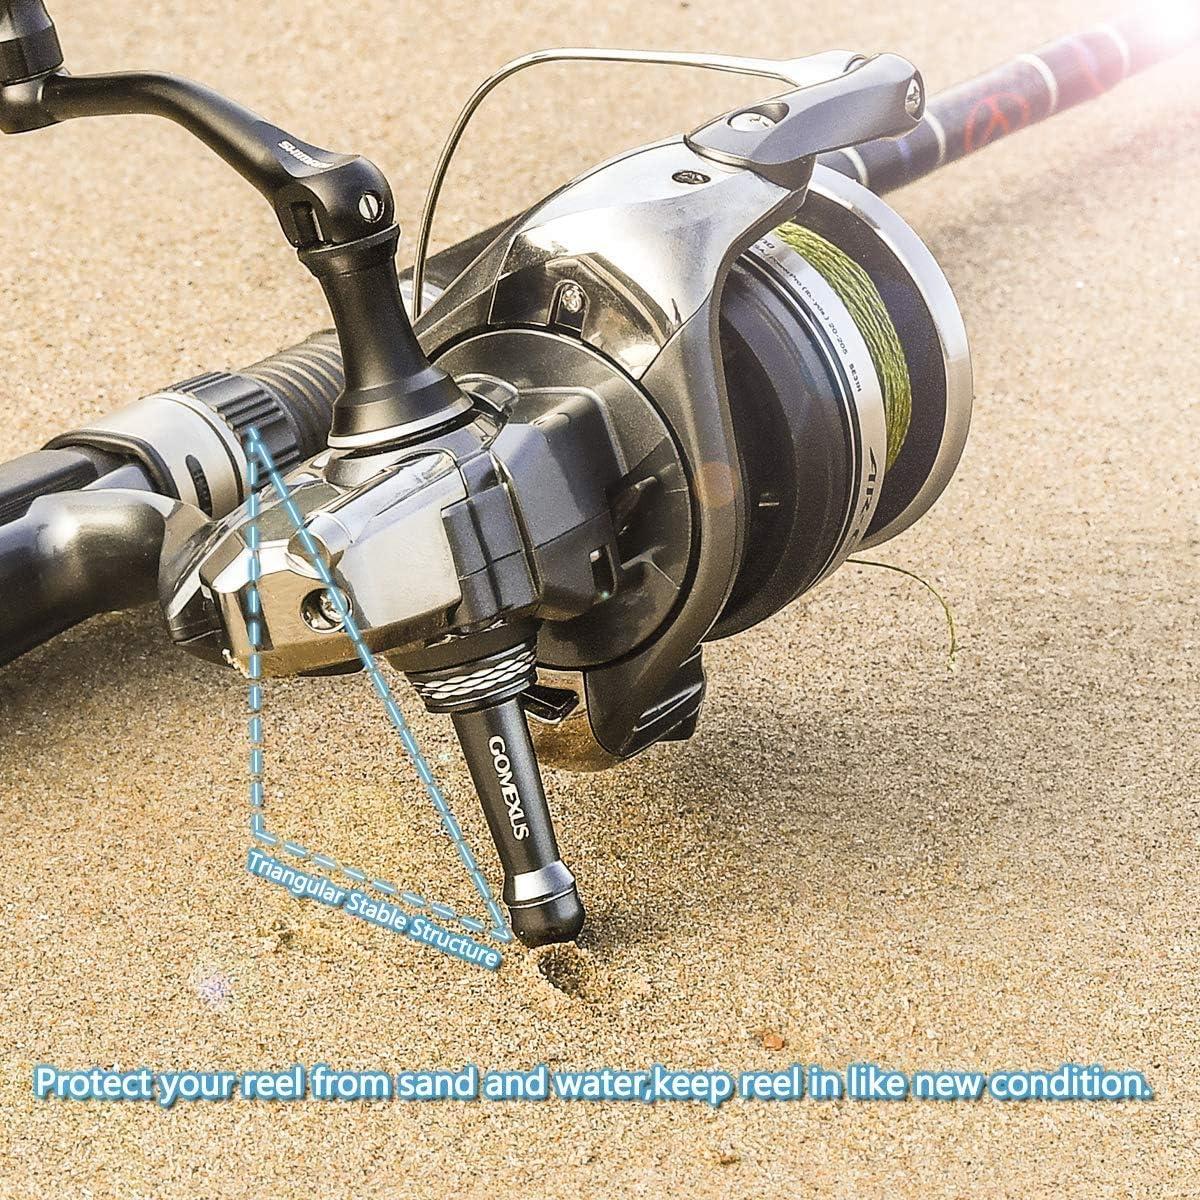 GOMEXUS Reel Stand Protect Reel from Rock Compatiable for Shimano Stradic  Stella Vanford Daiwa Certate Exist Red for Vanford/Stradic CI 4 42mm-basic